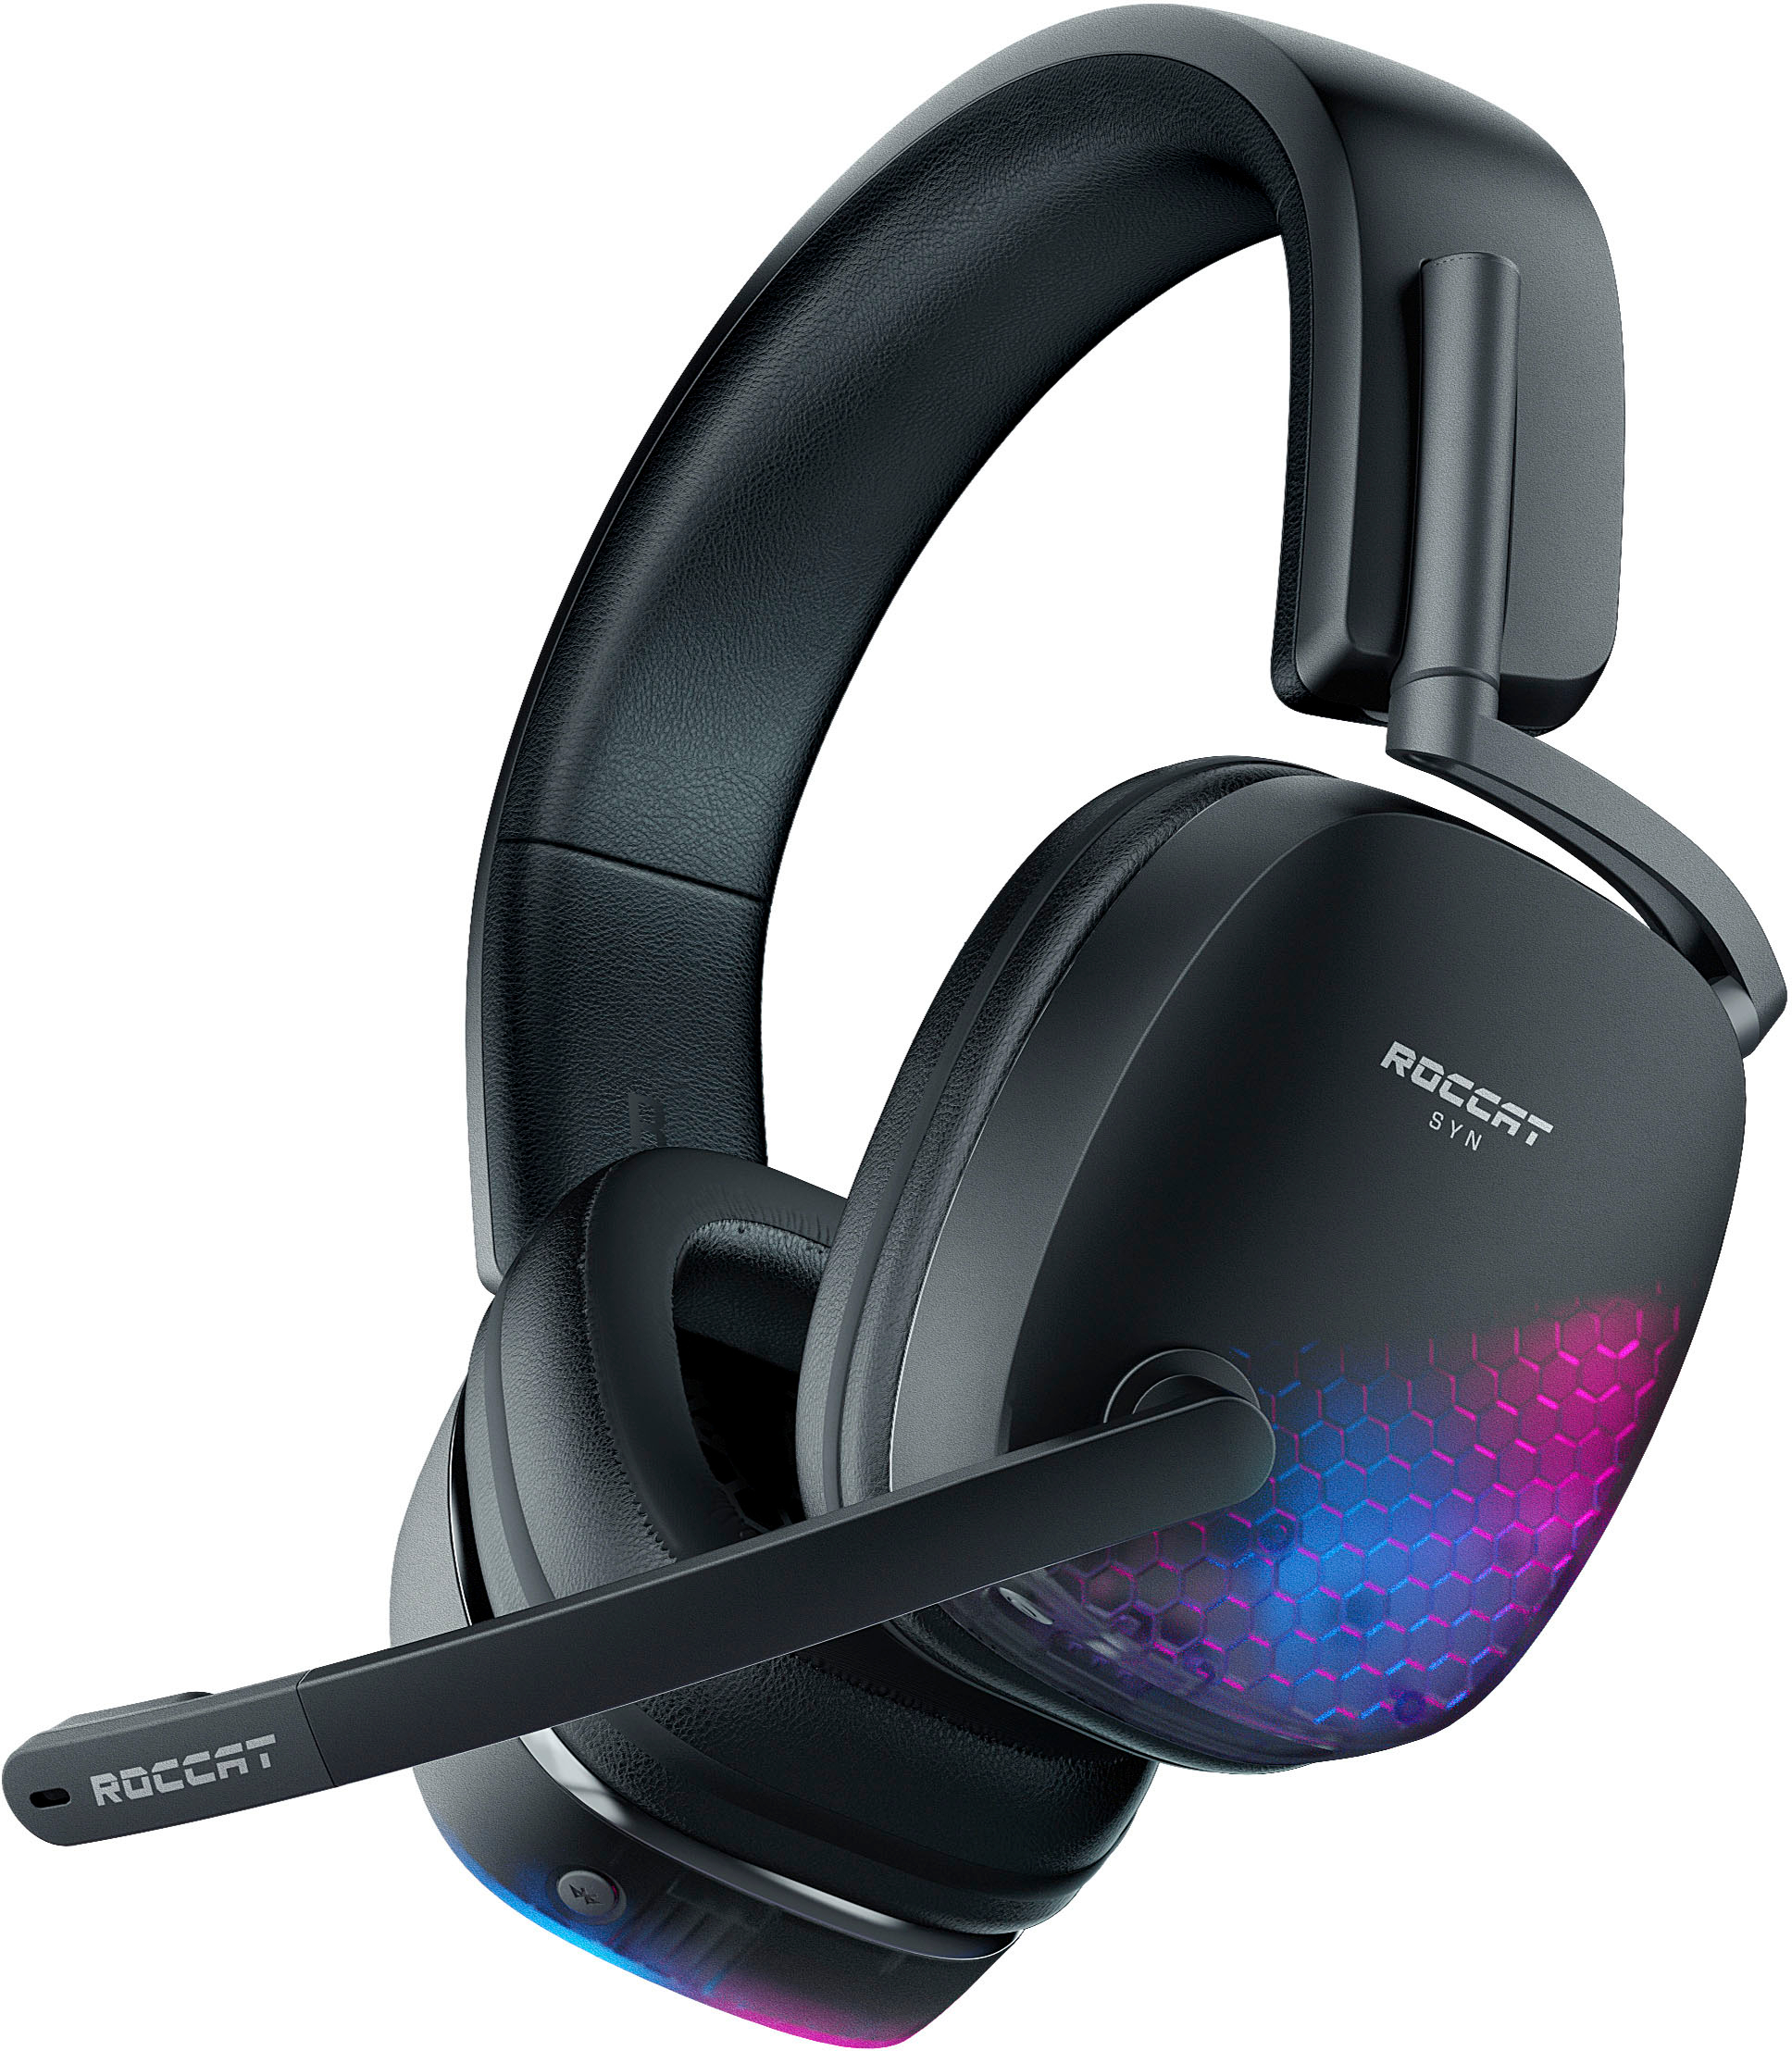 ROCCAT SYN Max Air Wireless Gaming Headset for PC Black ROC-14-155-01 -  Best Buy